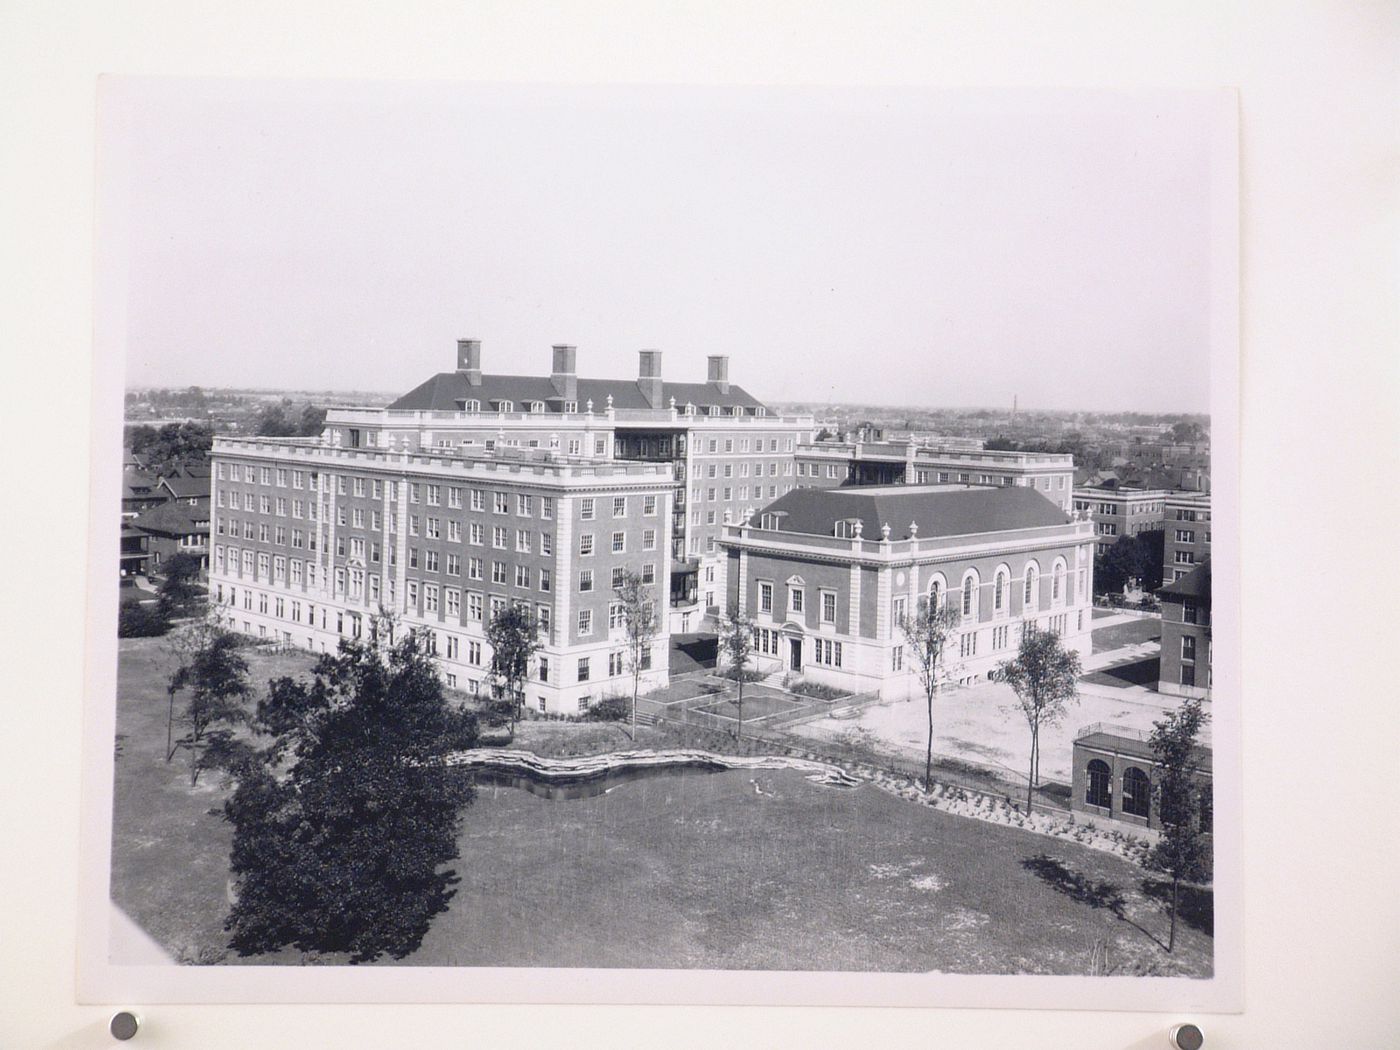 View of the lateral and rear façades of Clara Ford Nurses' Home from above, Henry Ford Hospital, Detroit, Michigan